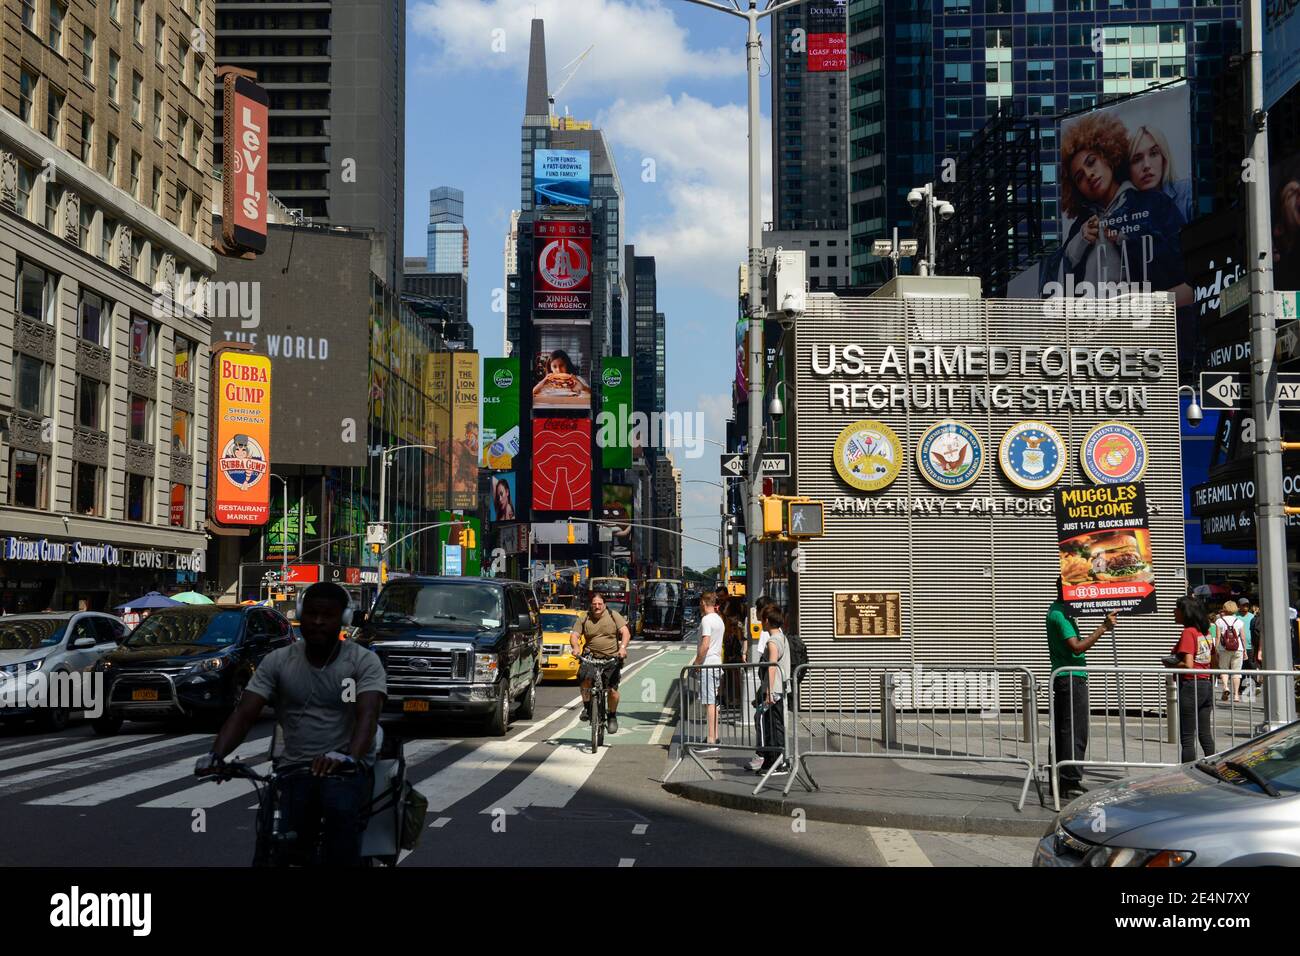 USA, New York City, Manhattan, Broadway and Times Square, recruiting station of US armed forces Stock Photo